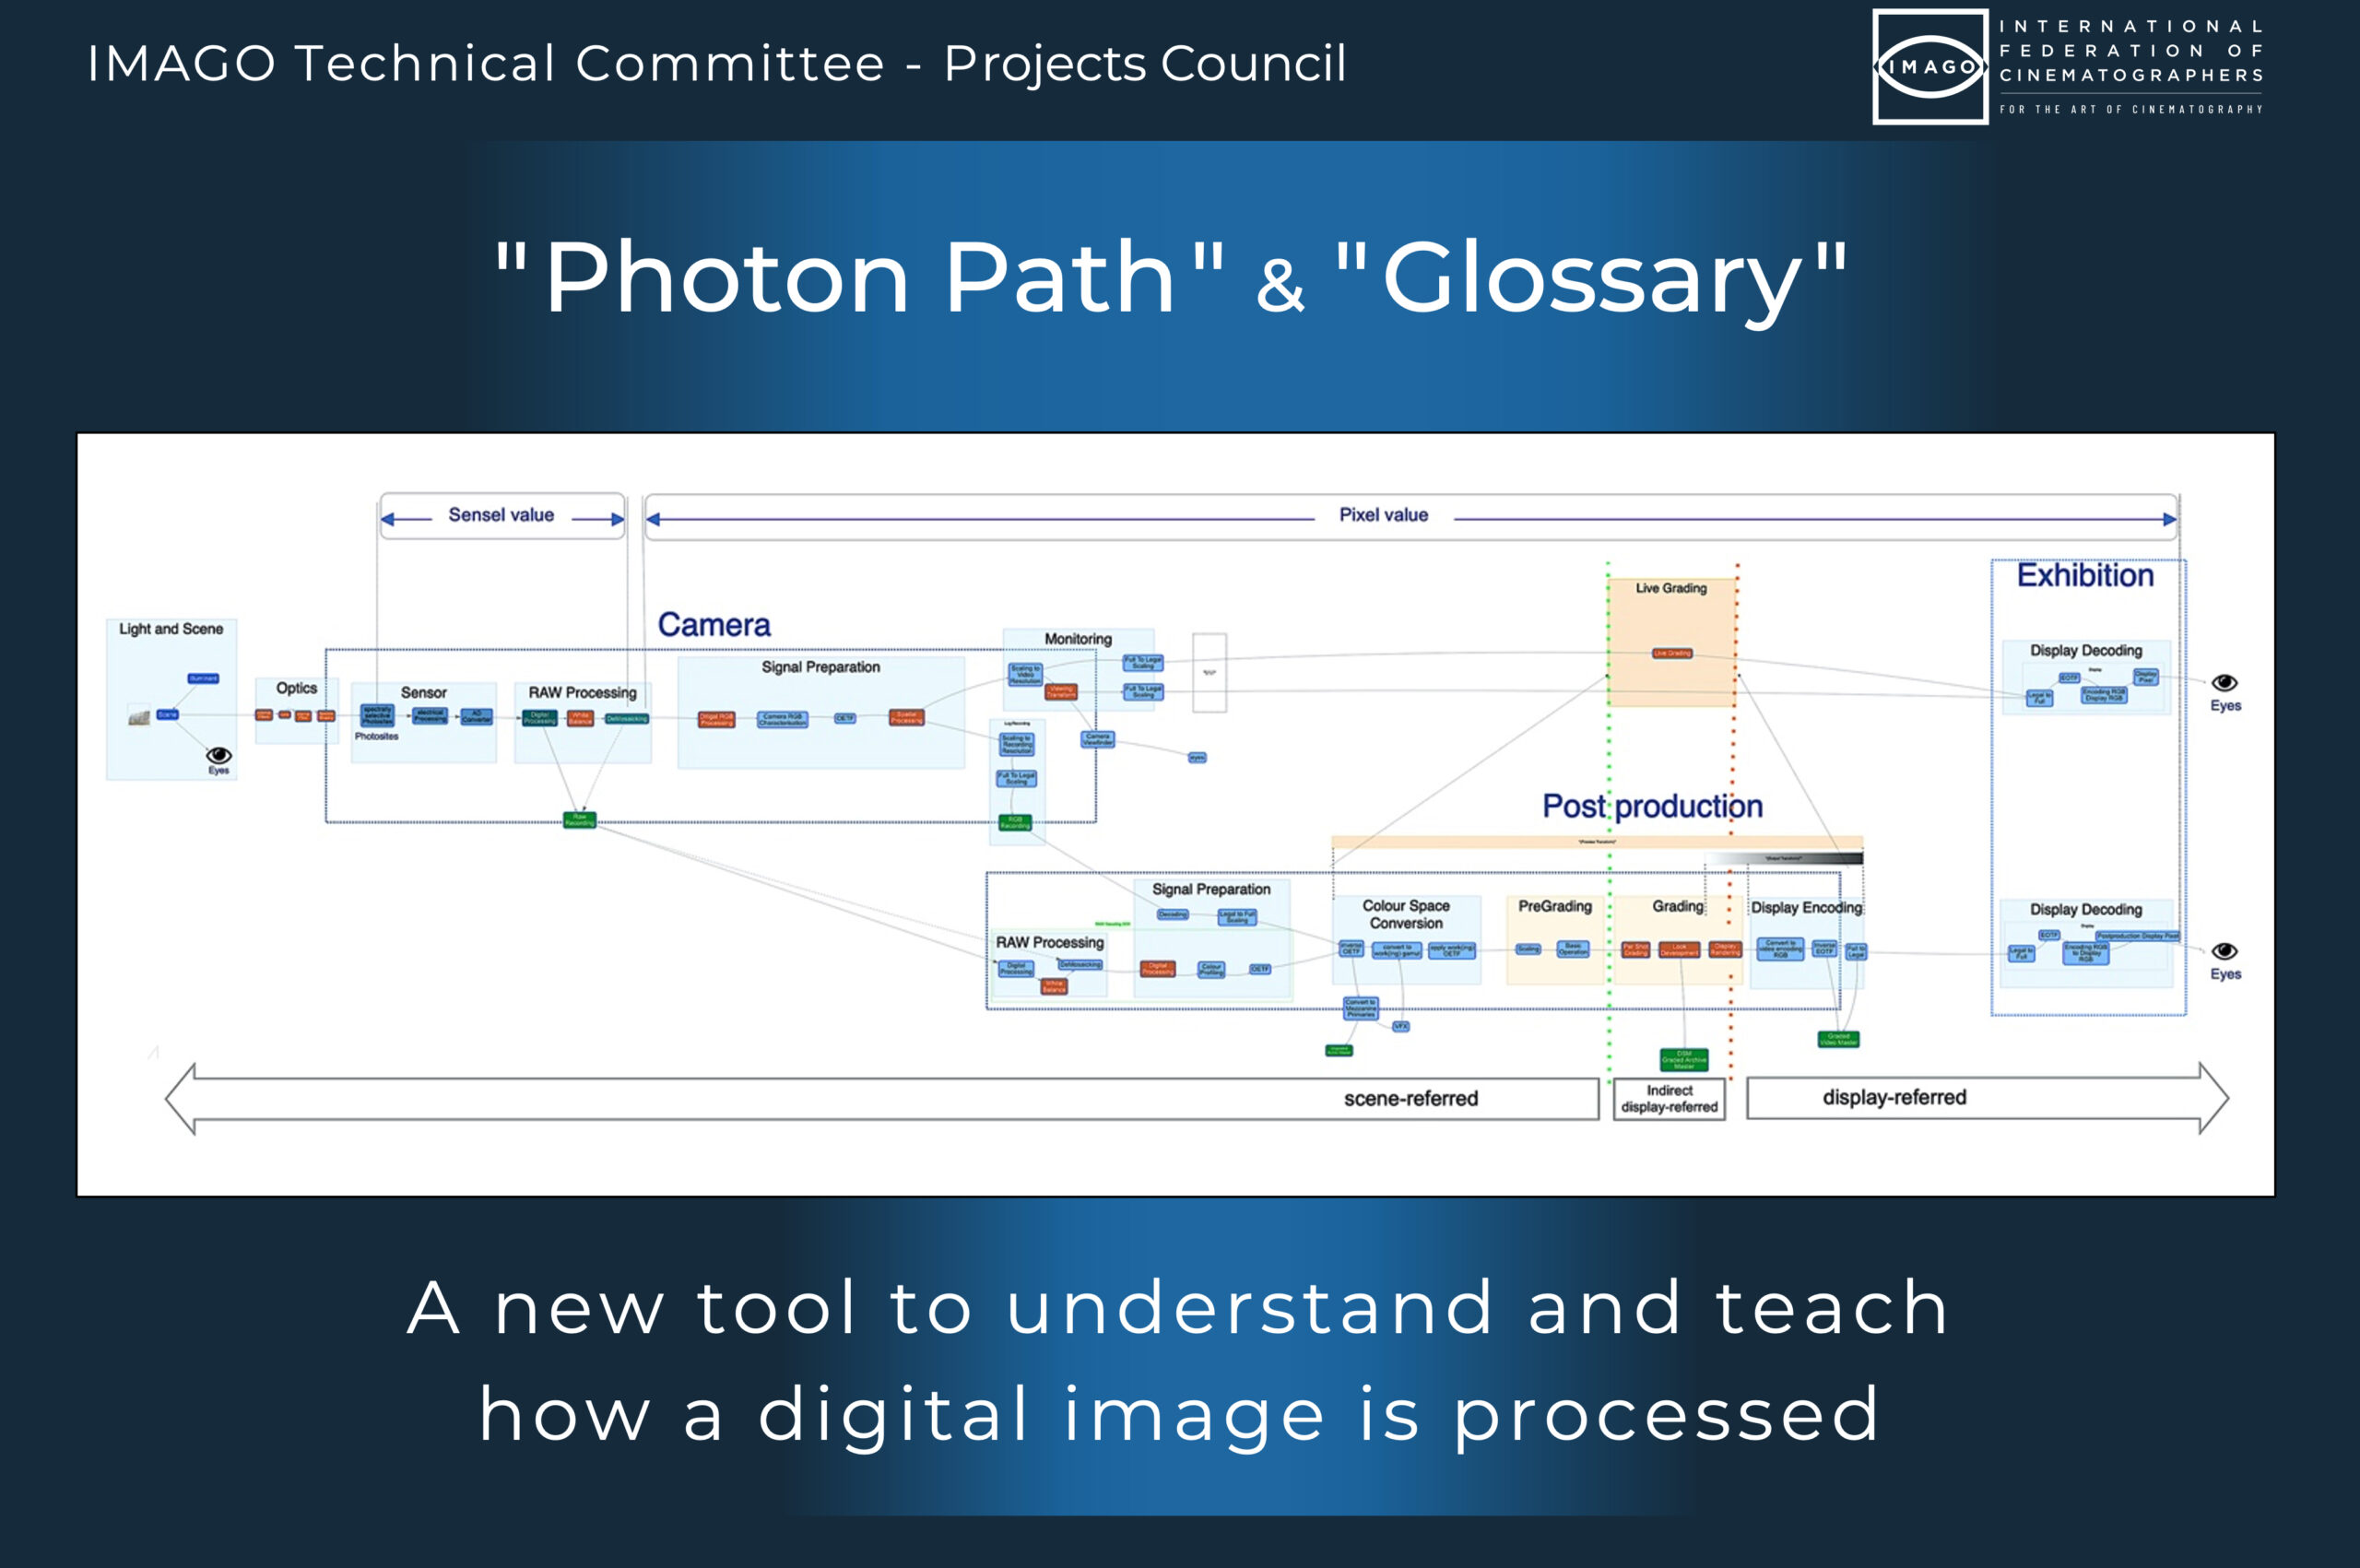 “Photon Path” and “Glossary” <br>A new tool to understand and teach how a digital image is processed.